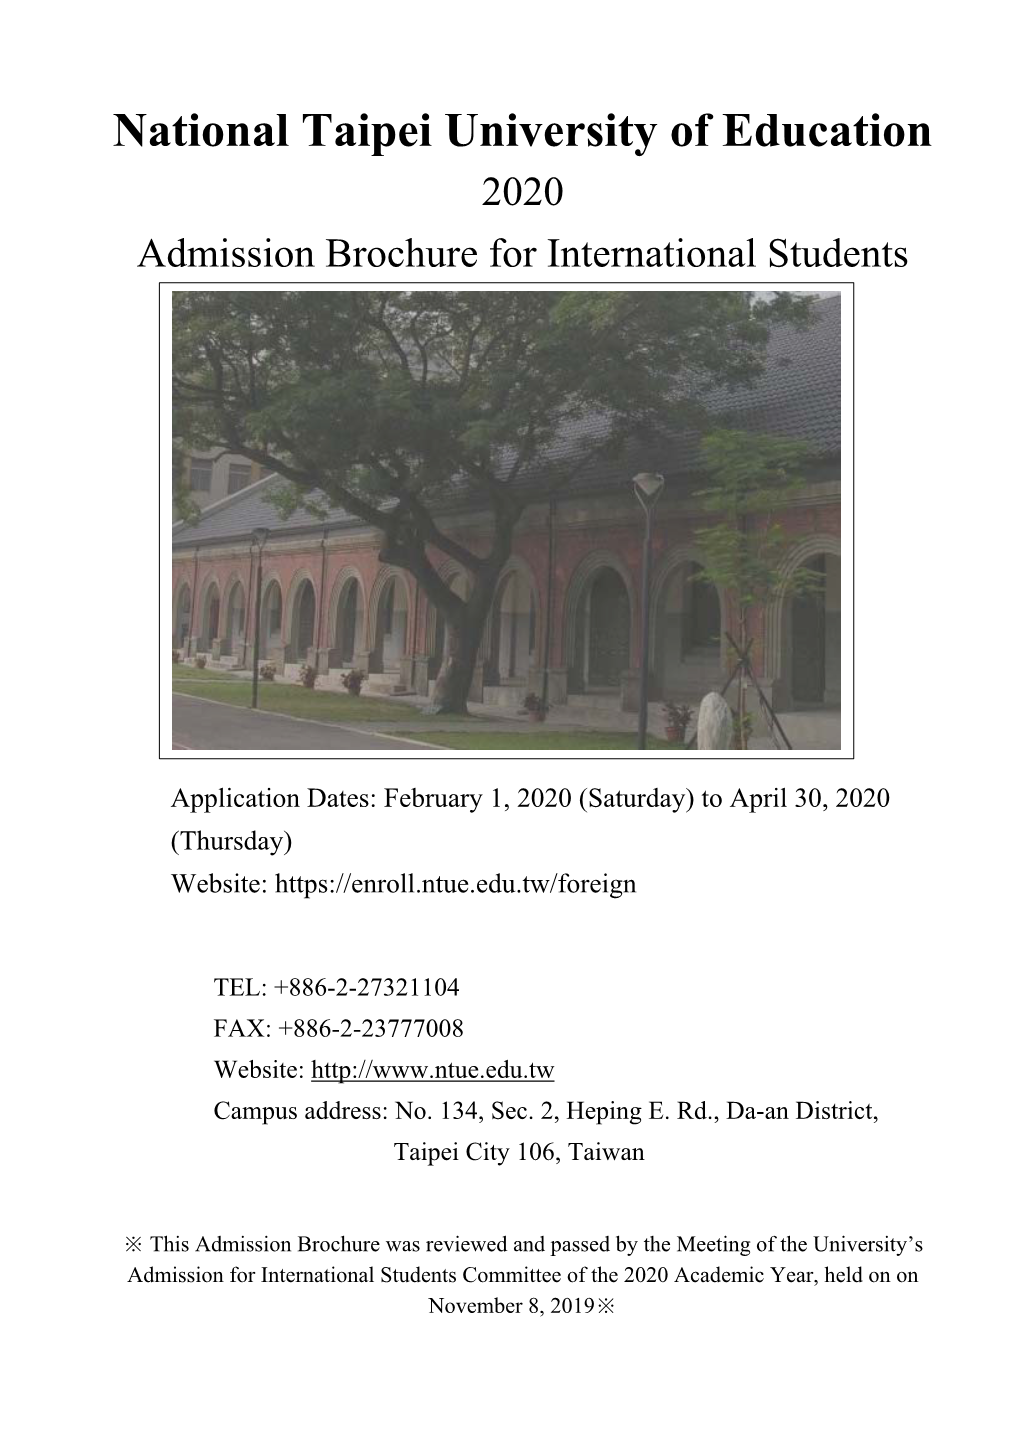 National Taipei University of Education 2020 Admission Brochure for International Students